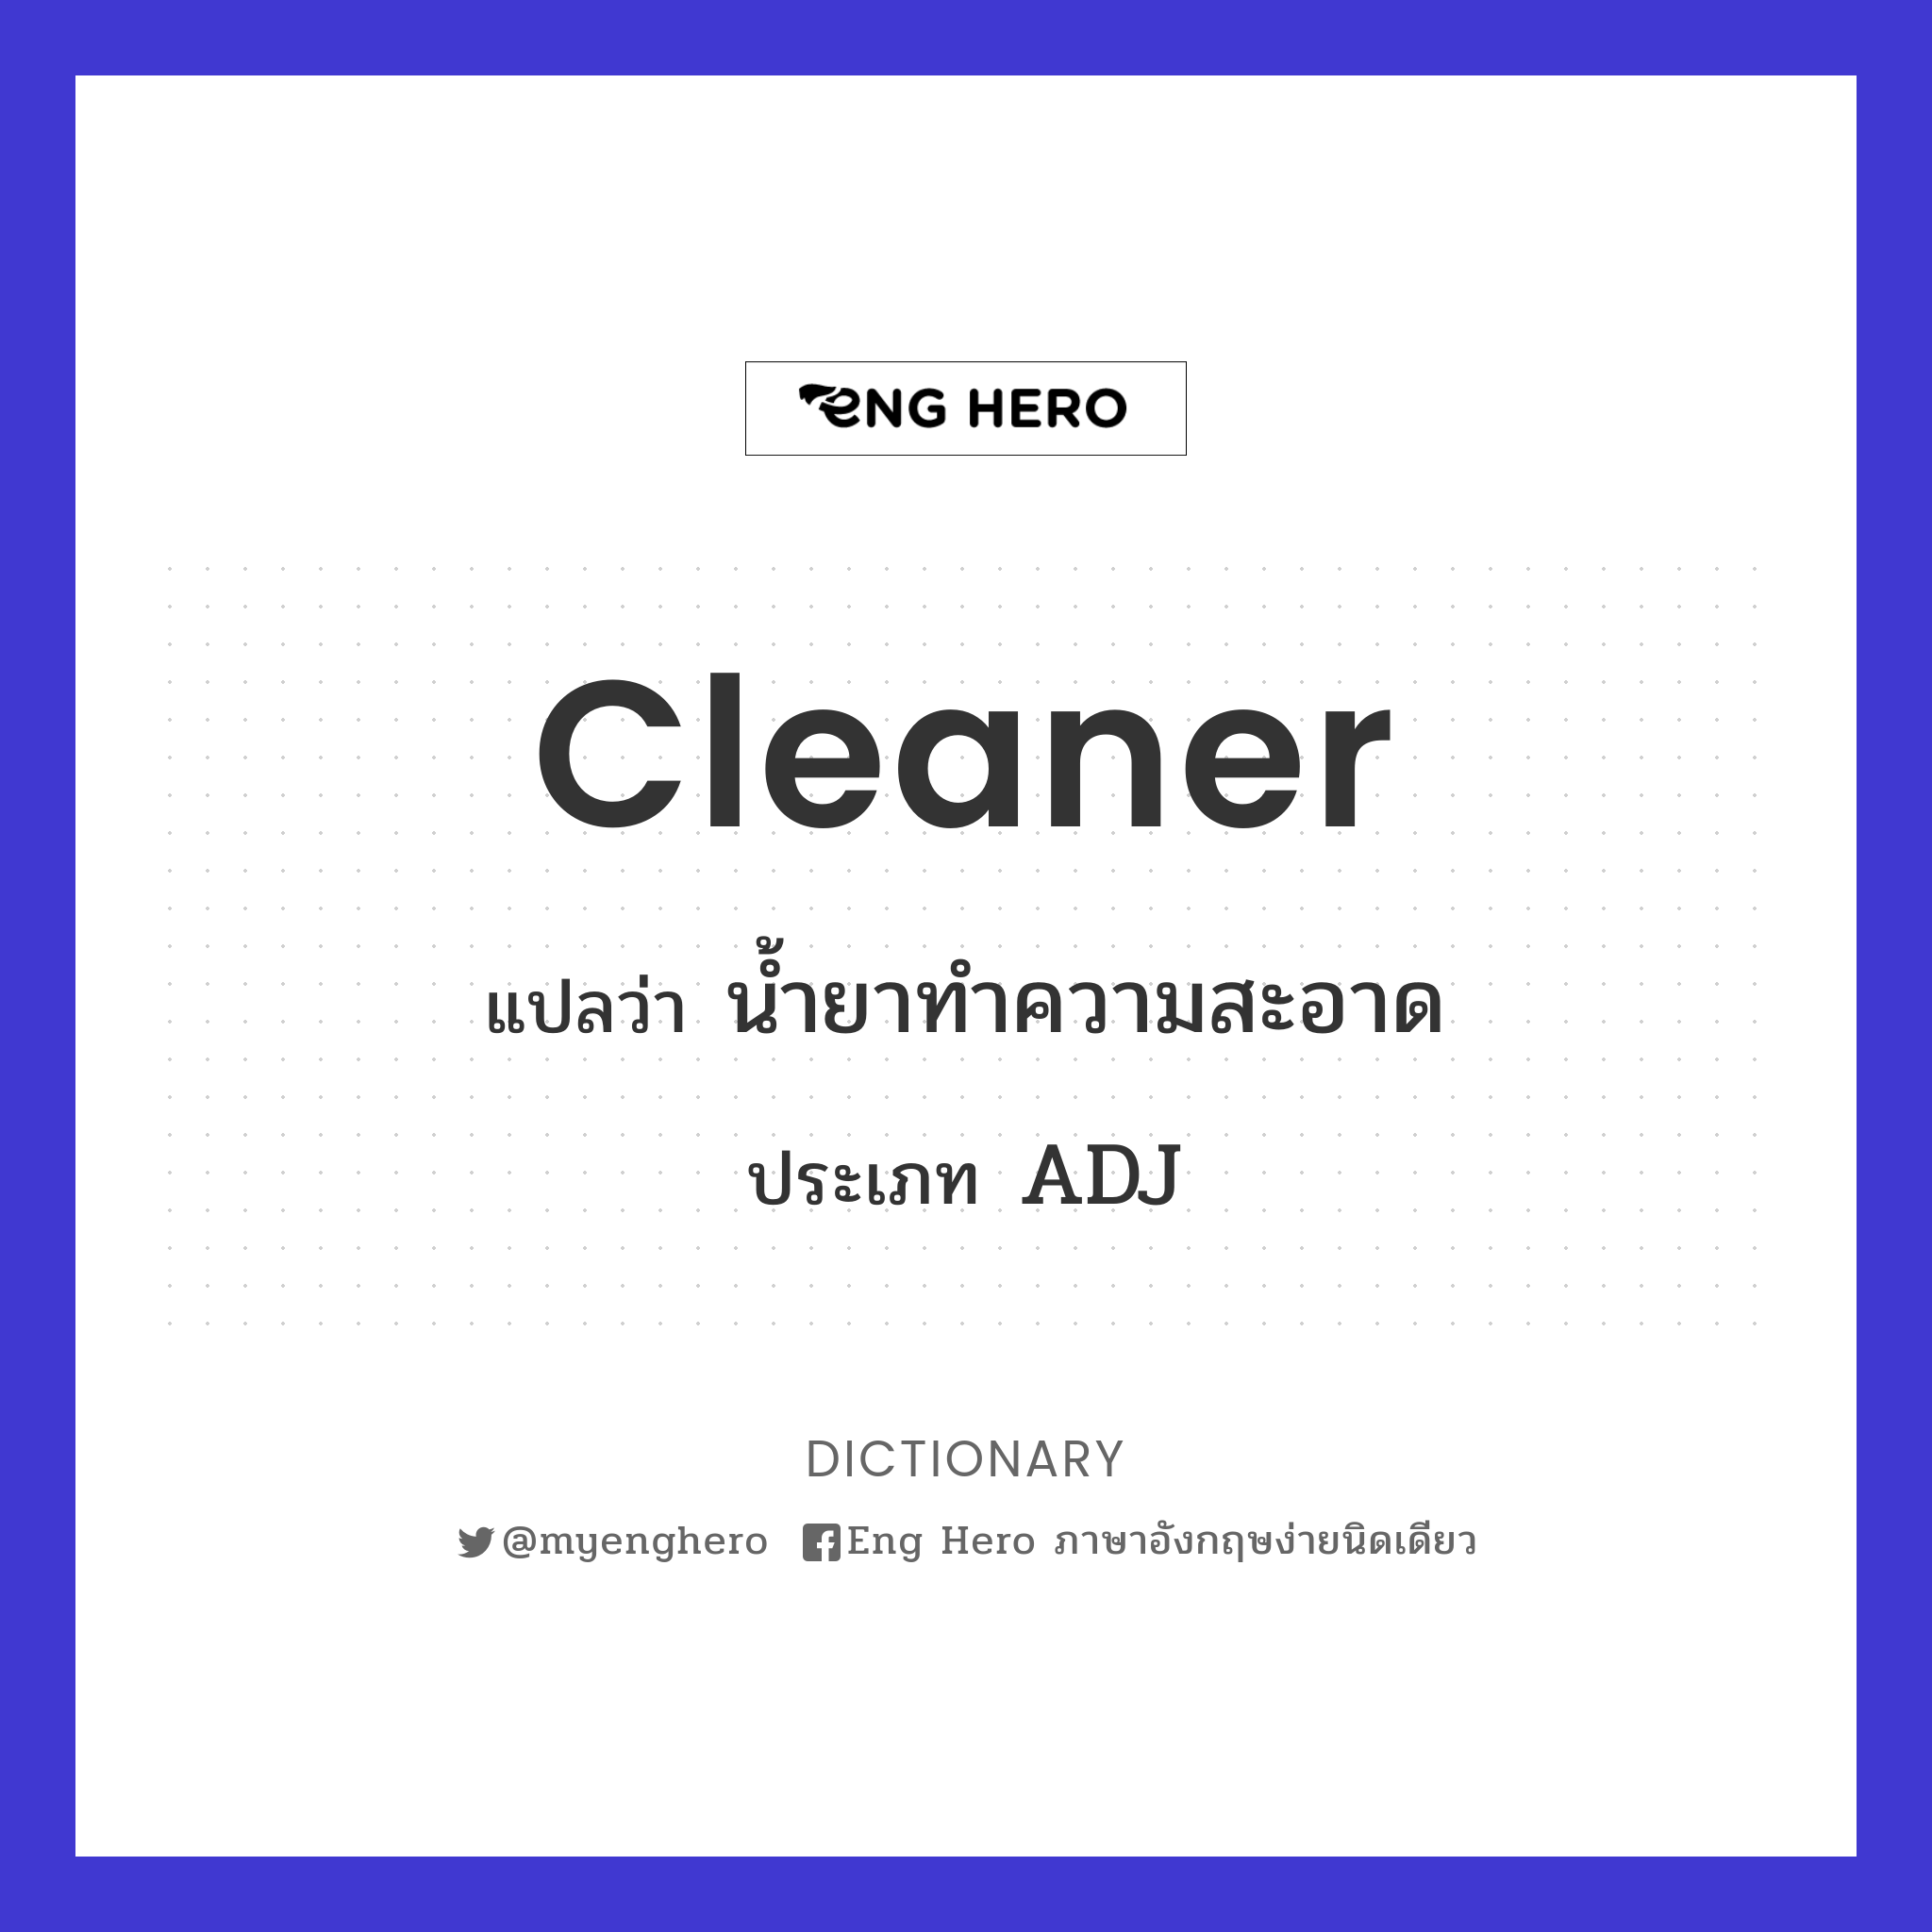 cleaner